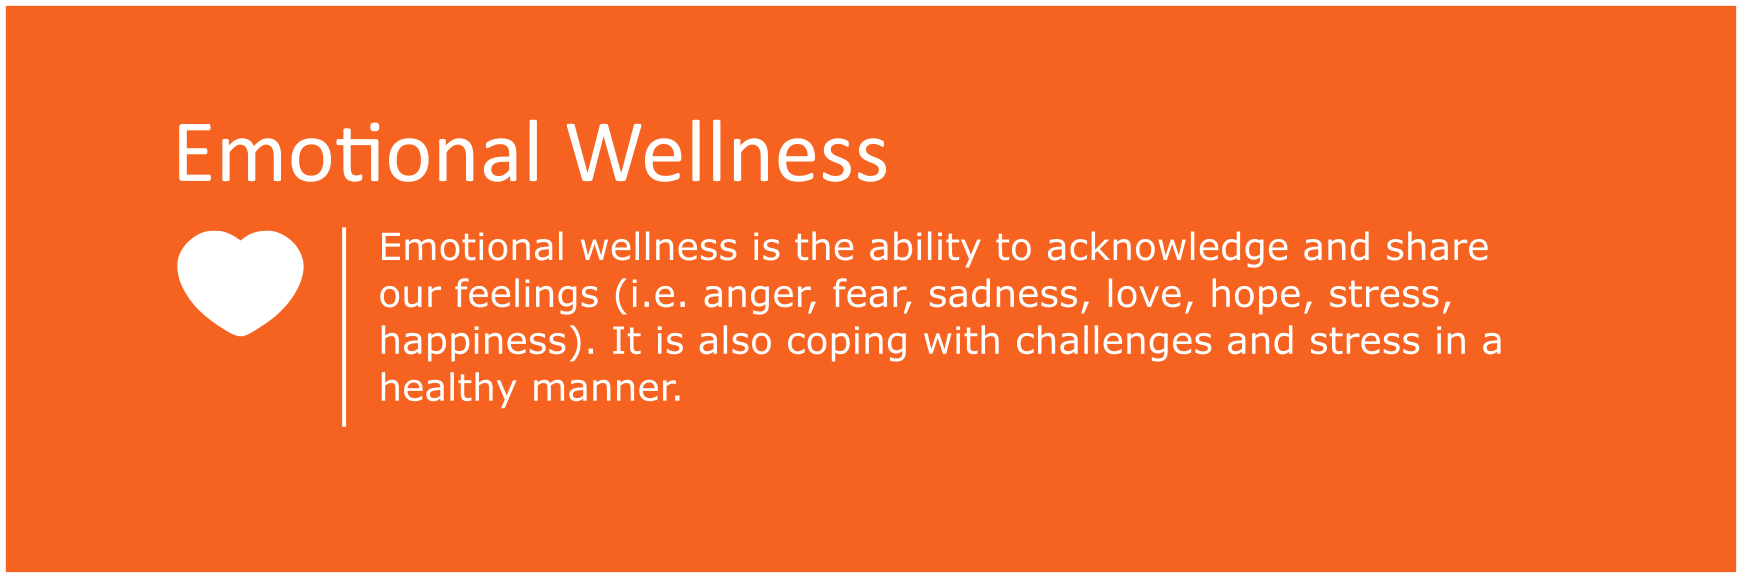 Emotional wellness is the ability to acknowledge and share our feelings (i.e. anger, fear, sadness, love, hope, stress, happiness). It is also coping with challenges and stress in a healthy manner.